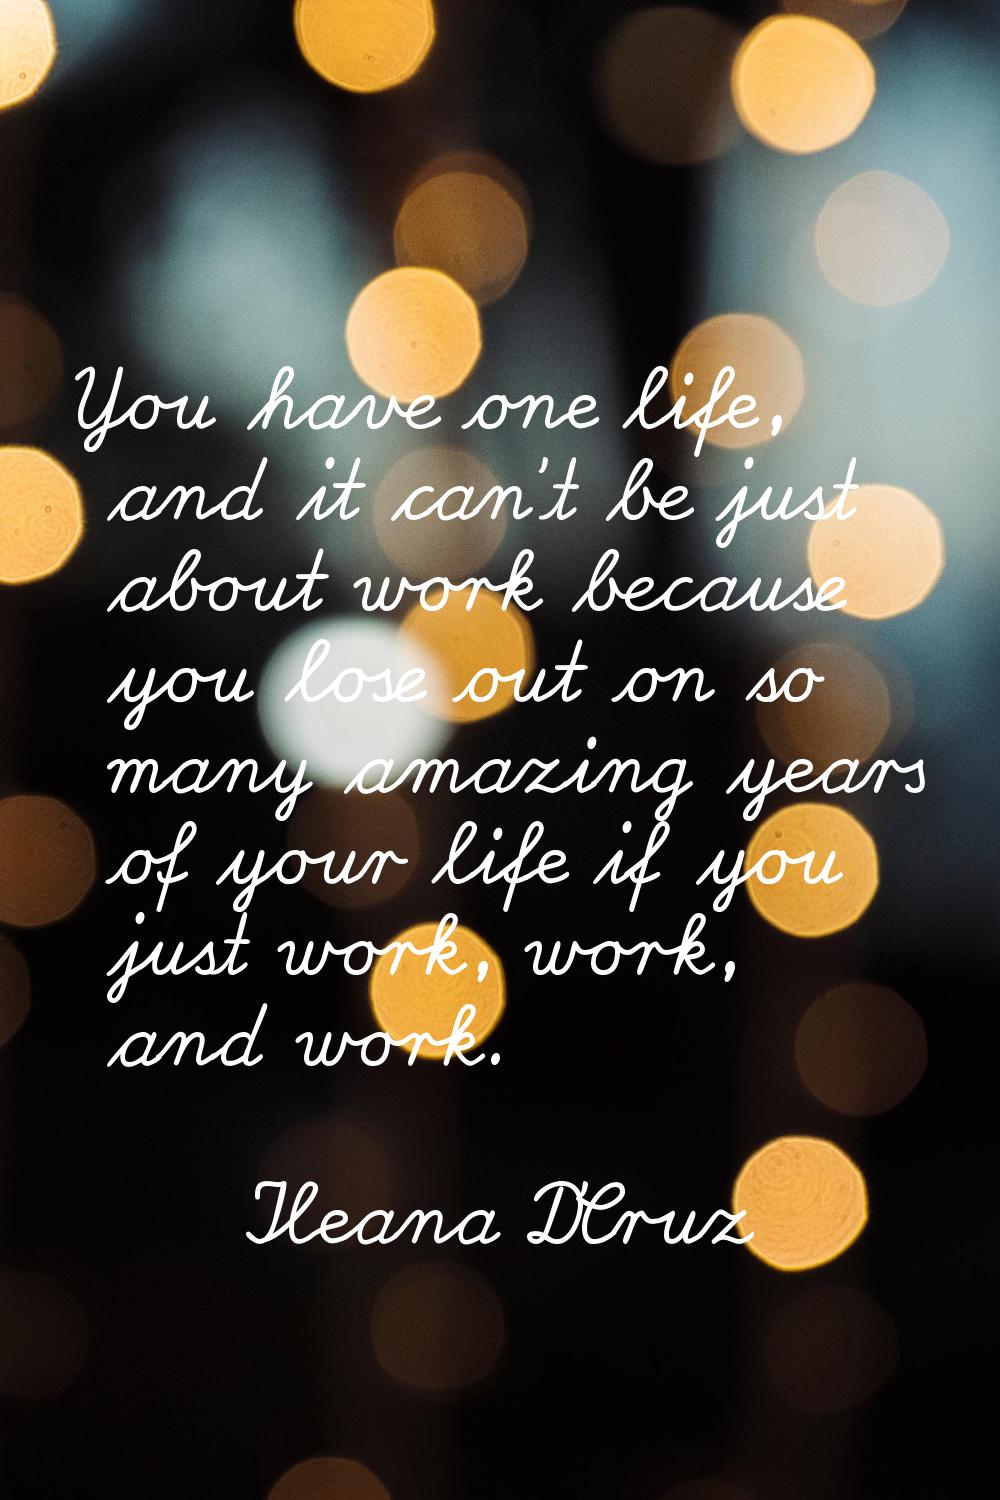 You have one life, and it can't be just about work because you lose out on so many amazing years of